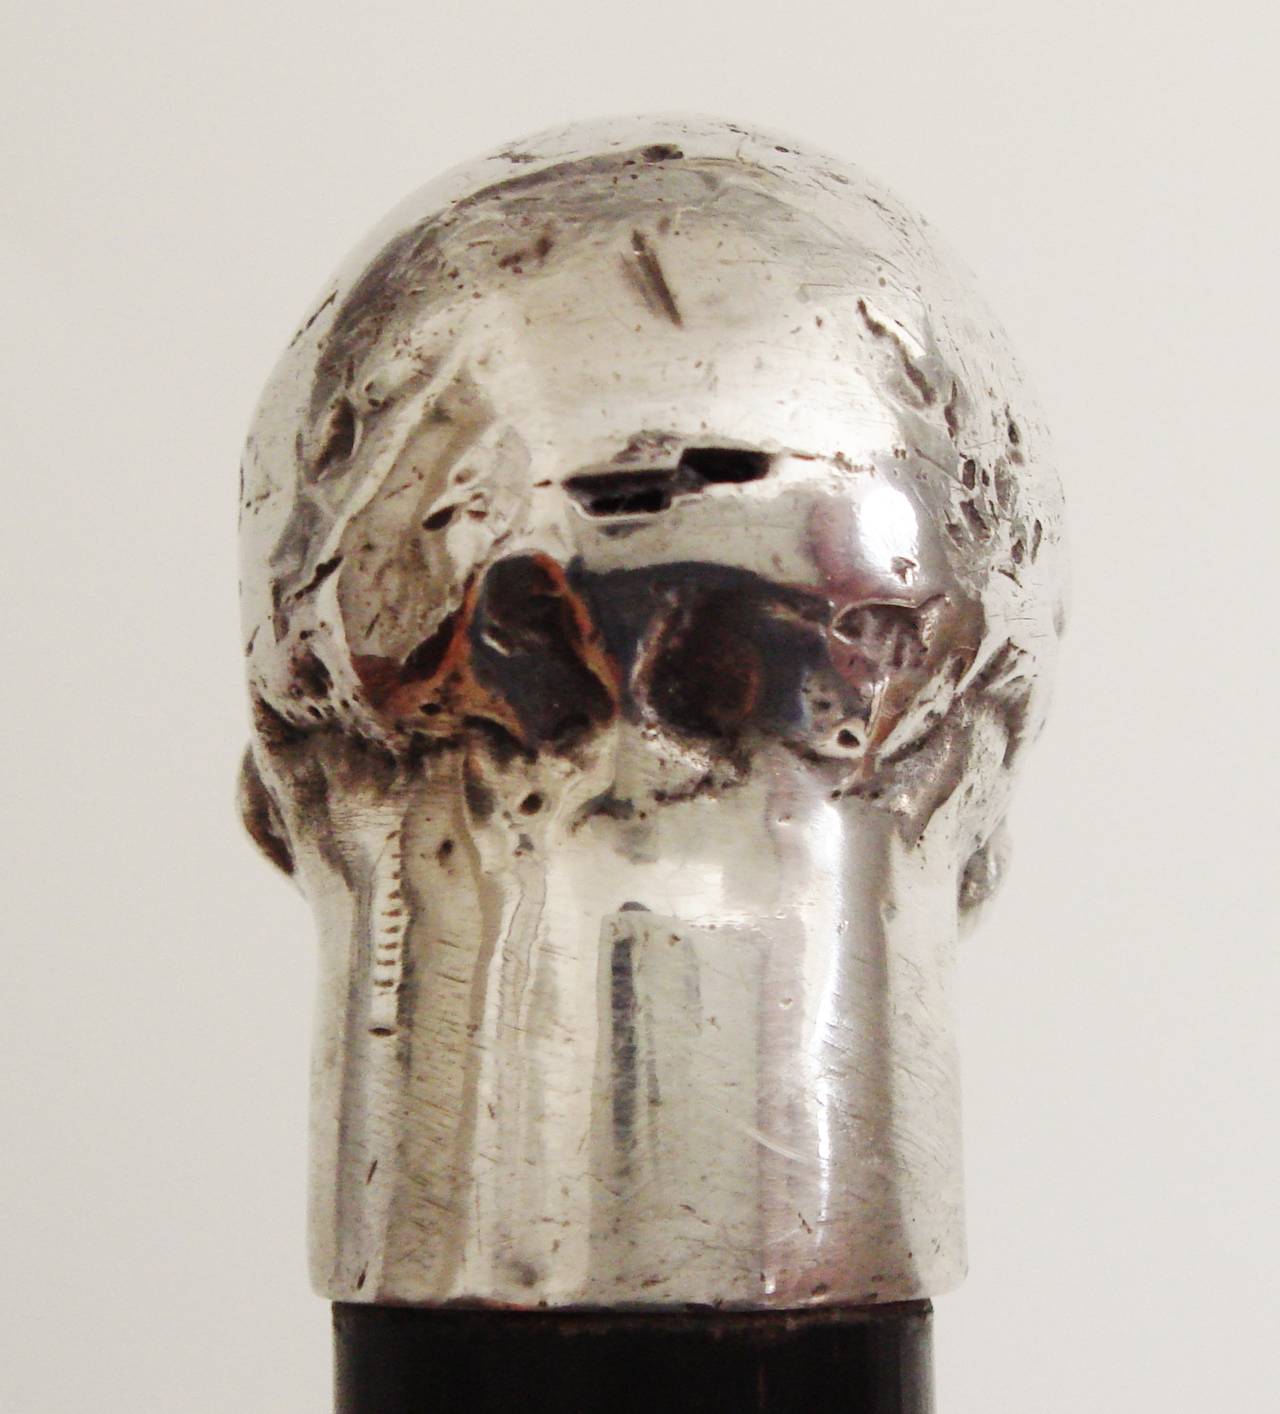 Early 20th Century German Masonic or Momento Mori Cane with Sterling Skull Knop & Garnet Eyes.